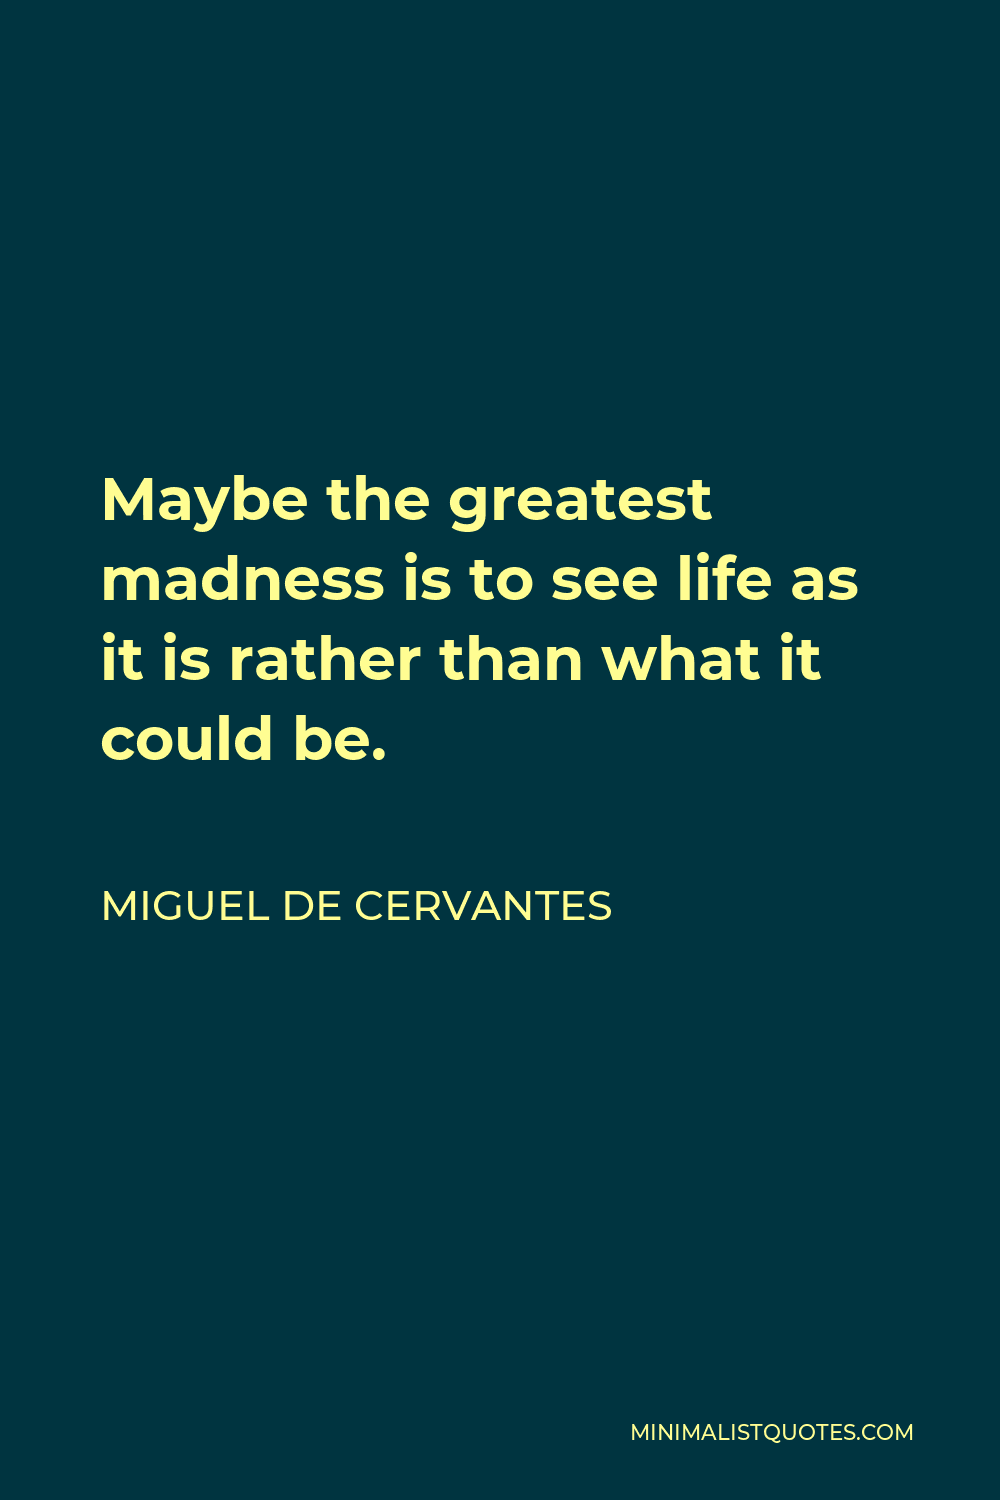 Miguel de Cervantes Quote - Maybe the greatest madness is to see life as it is rather than what it could be.